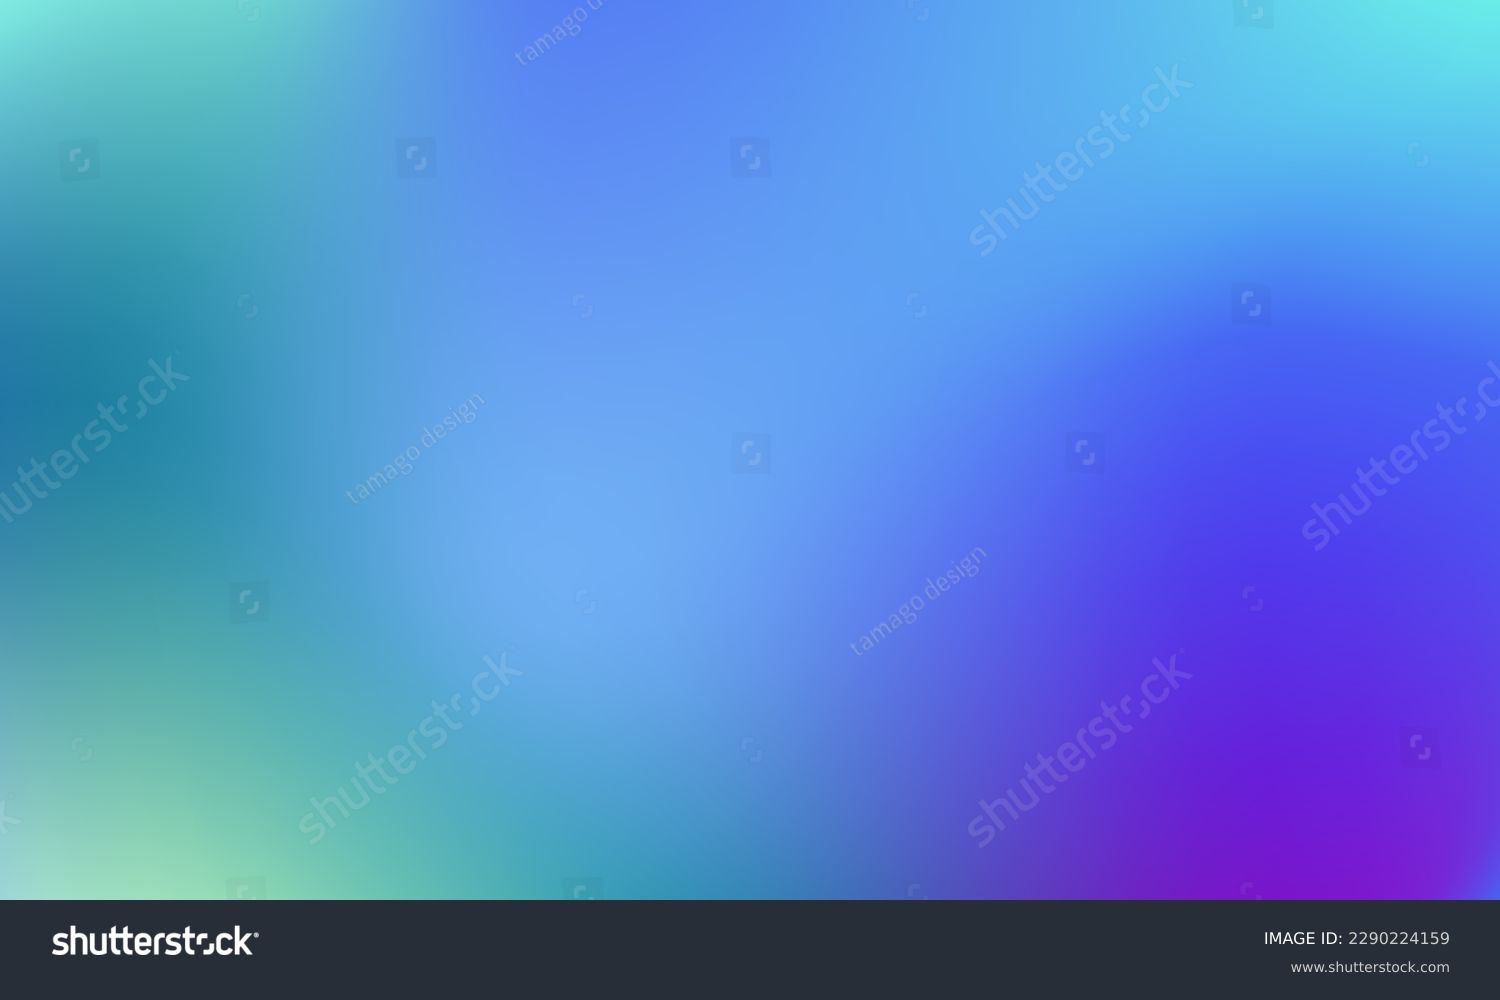 Blue, purple, green gradient.
Soft pastel color gradient. Holographic blurred abstract background. #2290224159